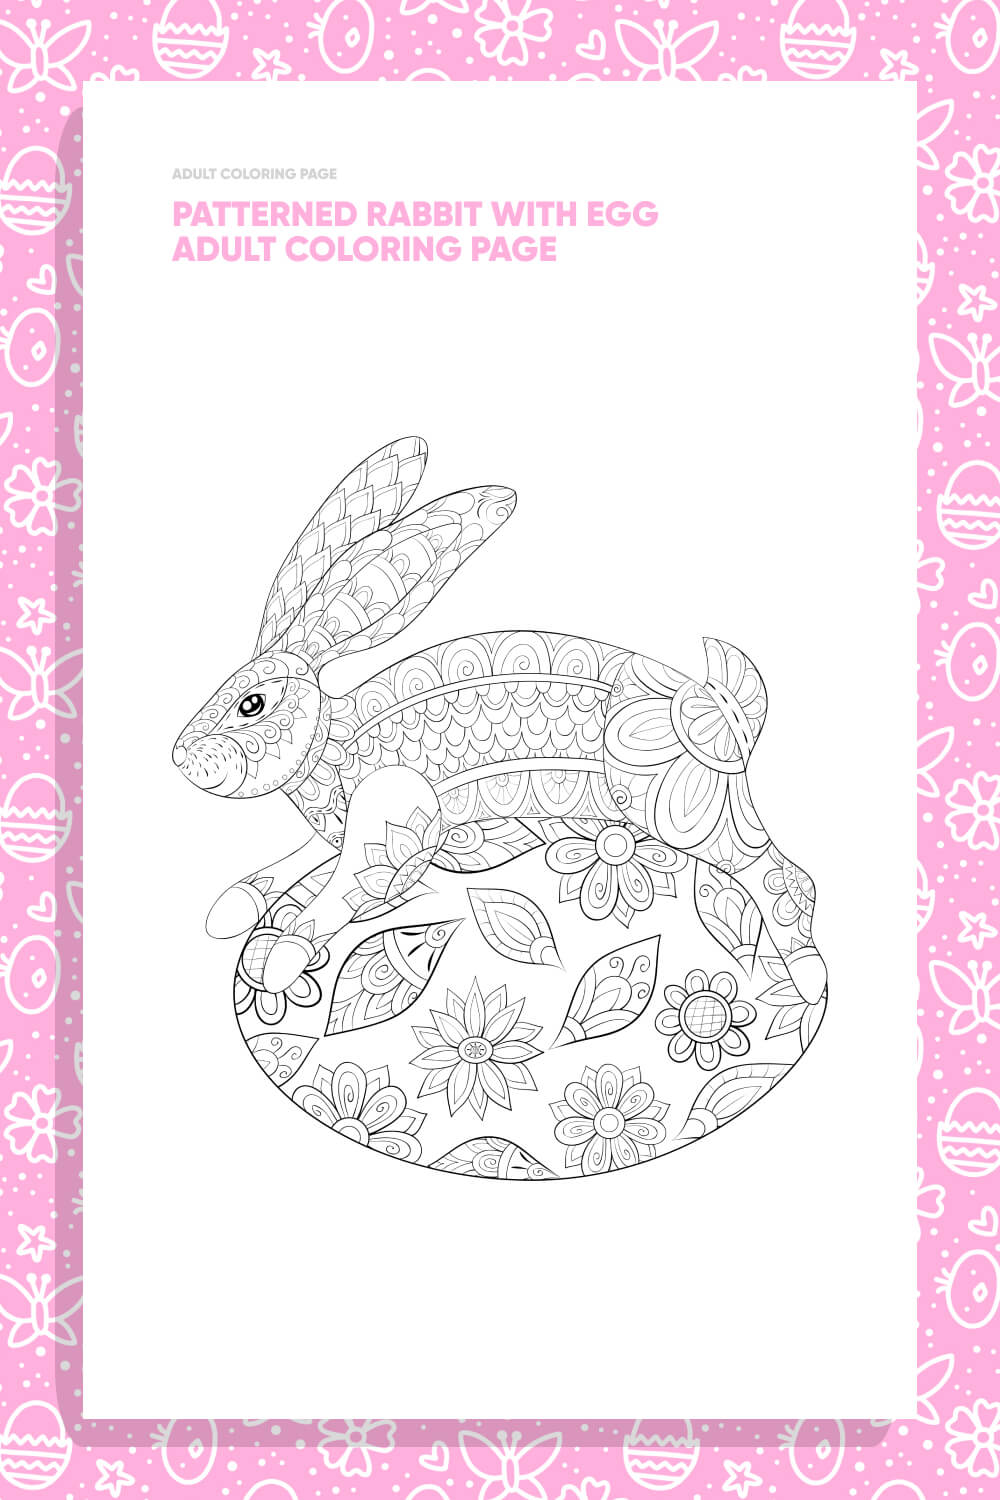 Patterned Rabbit with Egg Adult Coloring Page pinterest.